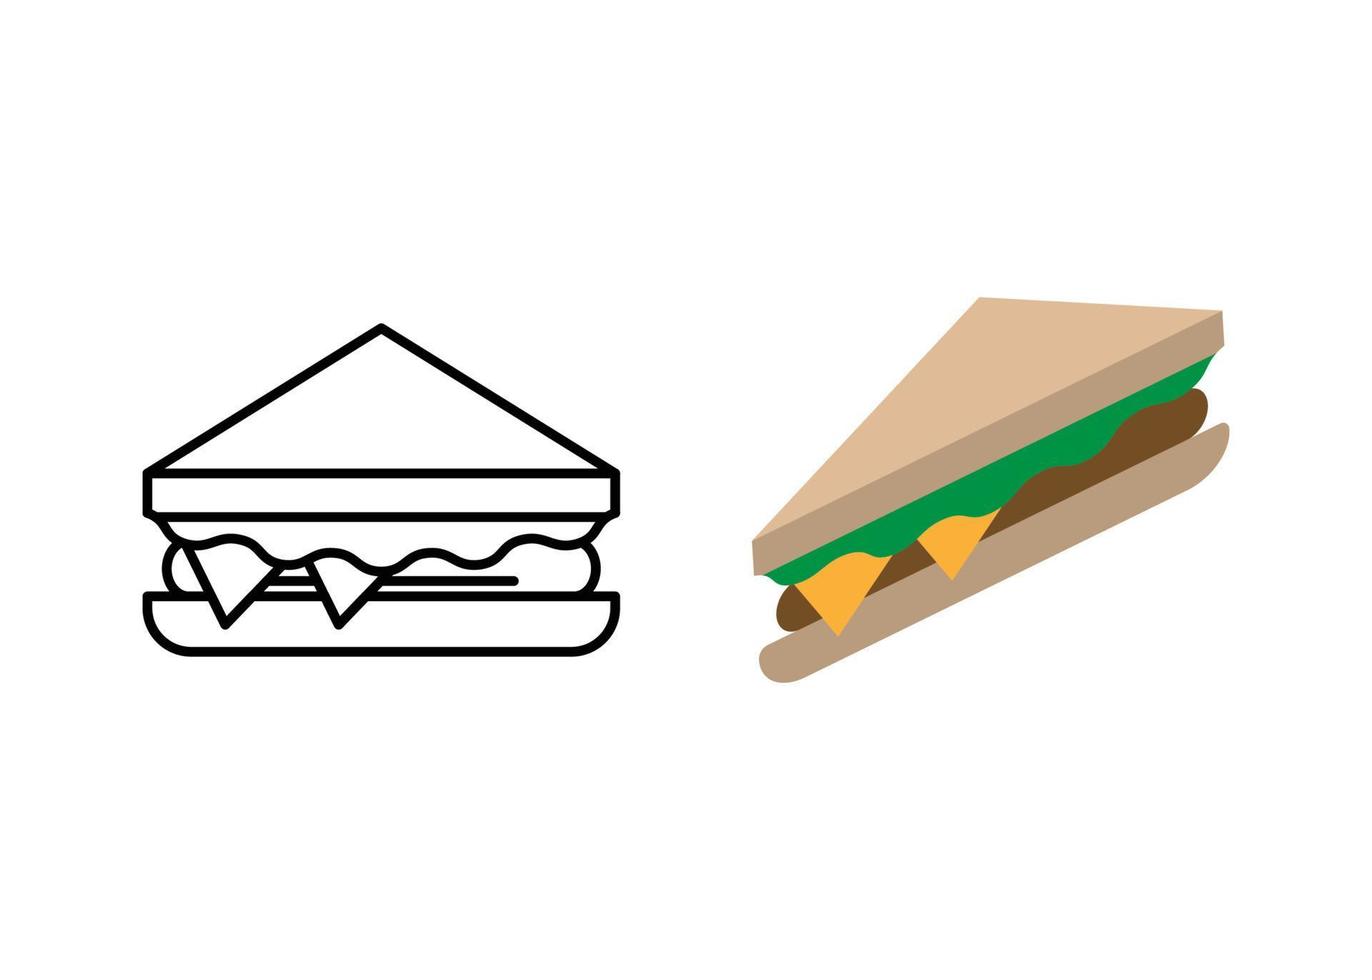 Sandwich icon design template vector isolated illustration